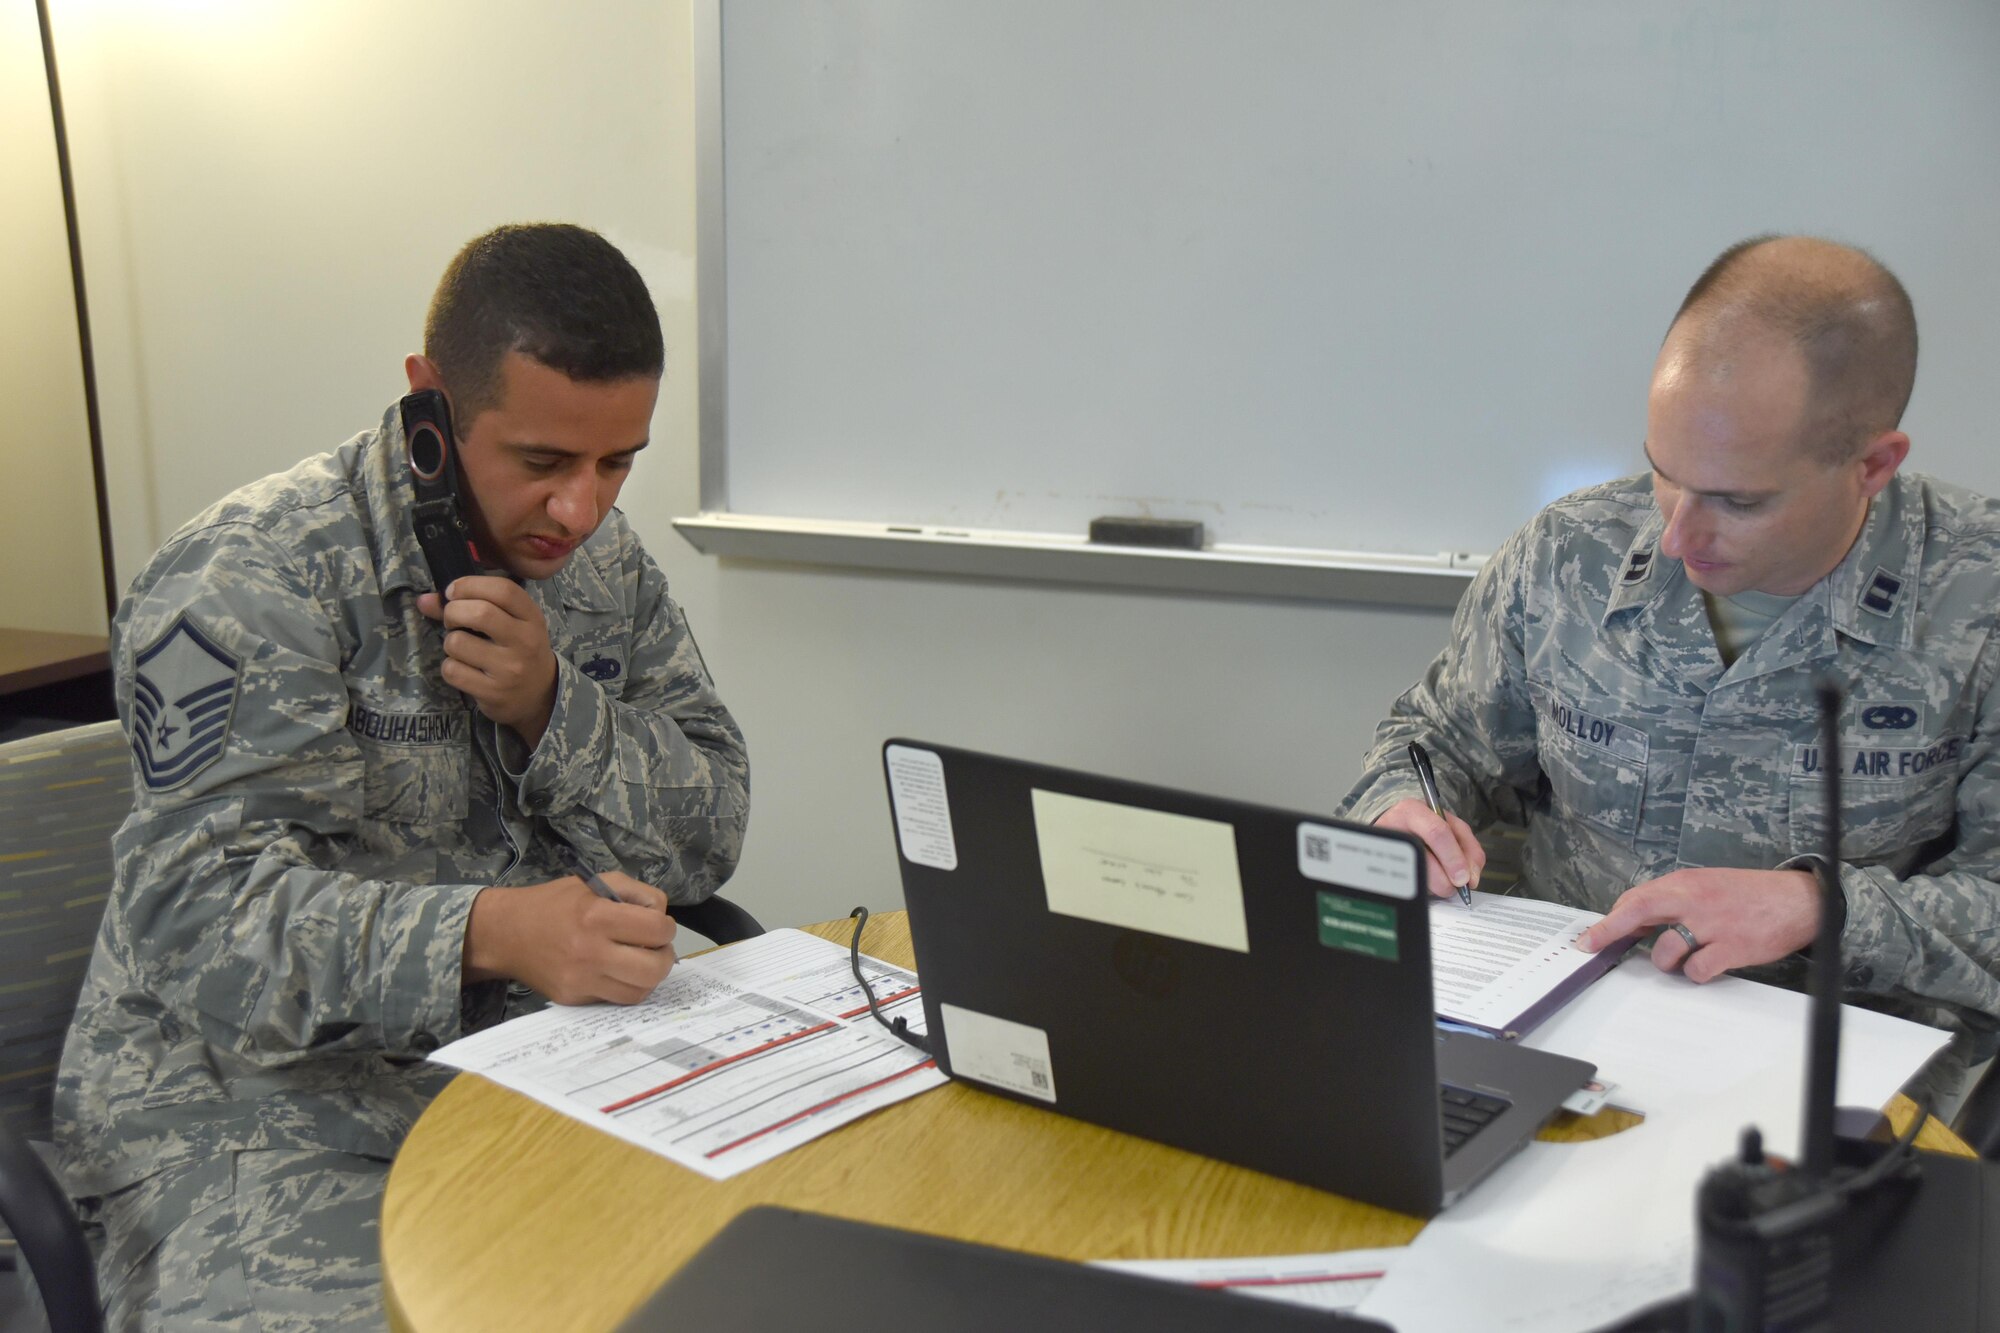 Master Sgt. Mohammed Abouhasem, 22nd Maintenance Squadron production supervisor, left, listens to a phone call during turn over with Capt. Michael Molloy, 22nd MXS operations officer, May 15, 2017, at McConnell Air Force Base, Kan. During turn over, Abouhasem informs Molloy about the status of aircraft. Abouhasem was raised in Doha, Qatar, and has proudly served in the U.S. Air Force for 15 years. (U.S. Air Force photo/Senior Airman Christopher Thornbury)